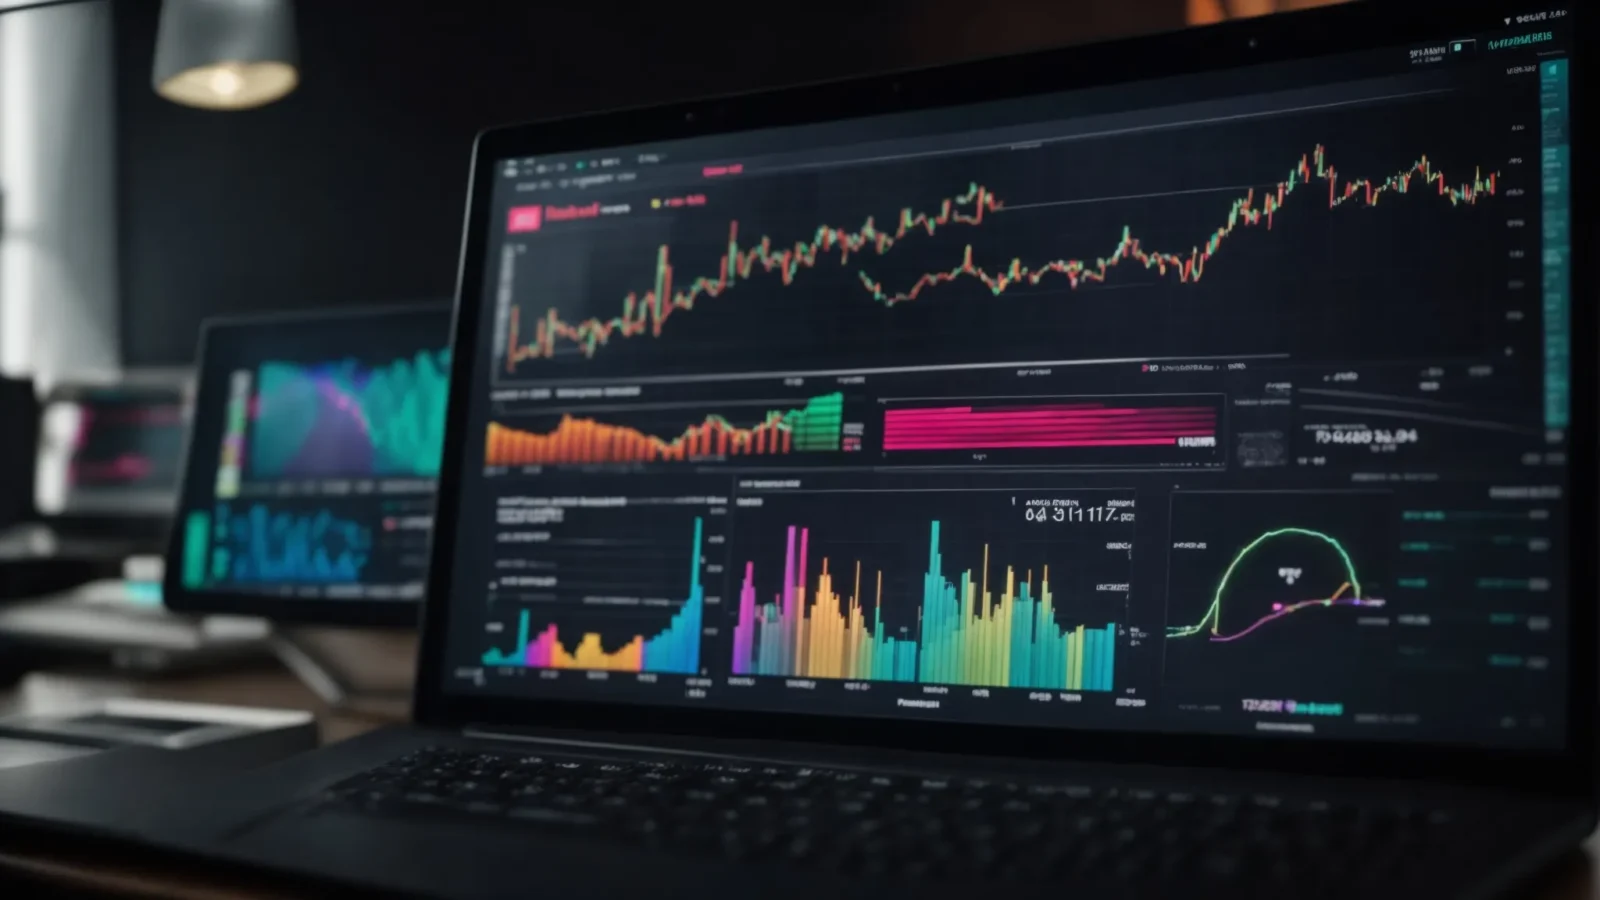 a close-up view of a computer screen displaying colorful graphs and charts analyzing website performance.